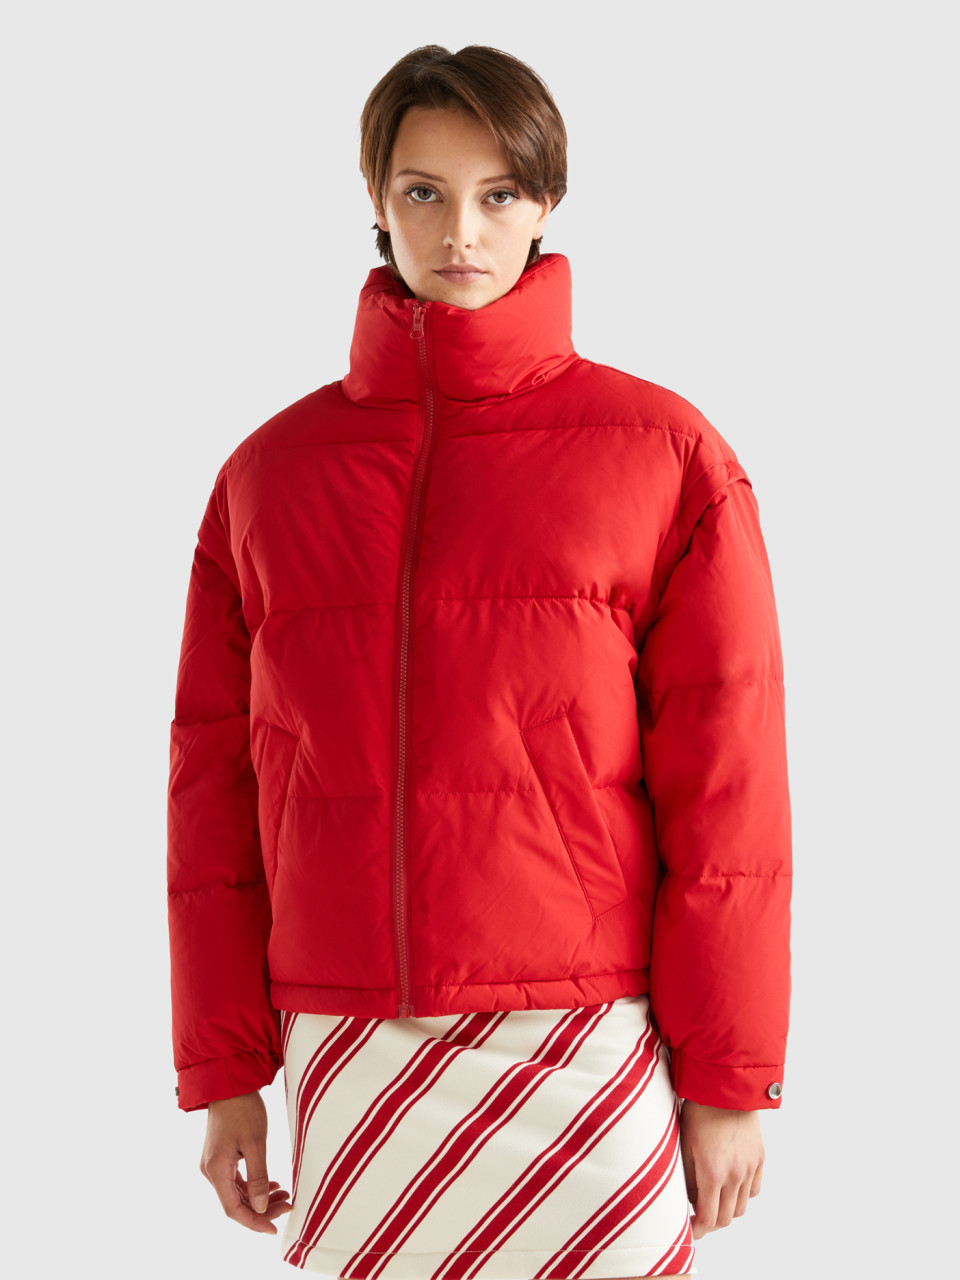 Benetton, Short Padded Jacket With Removable Sleeves, Red, Women